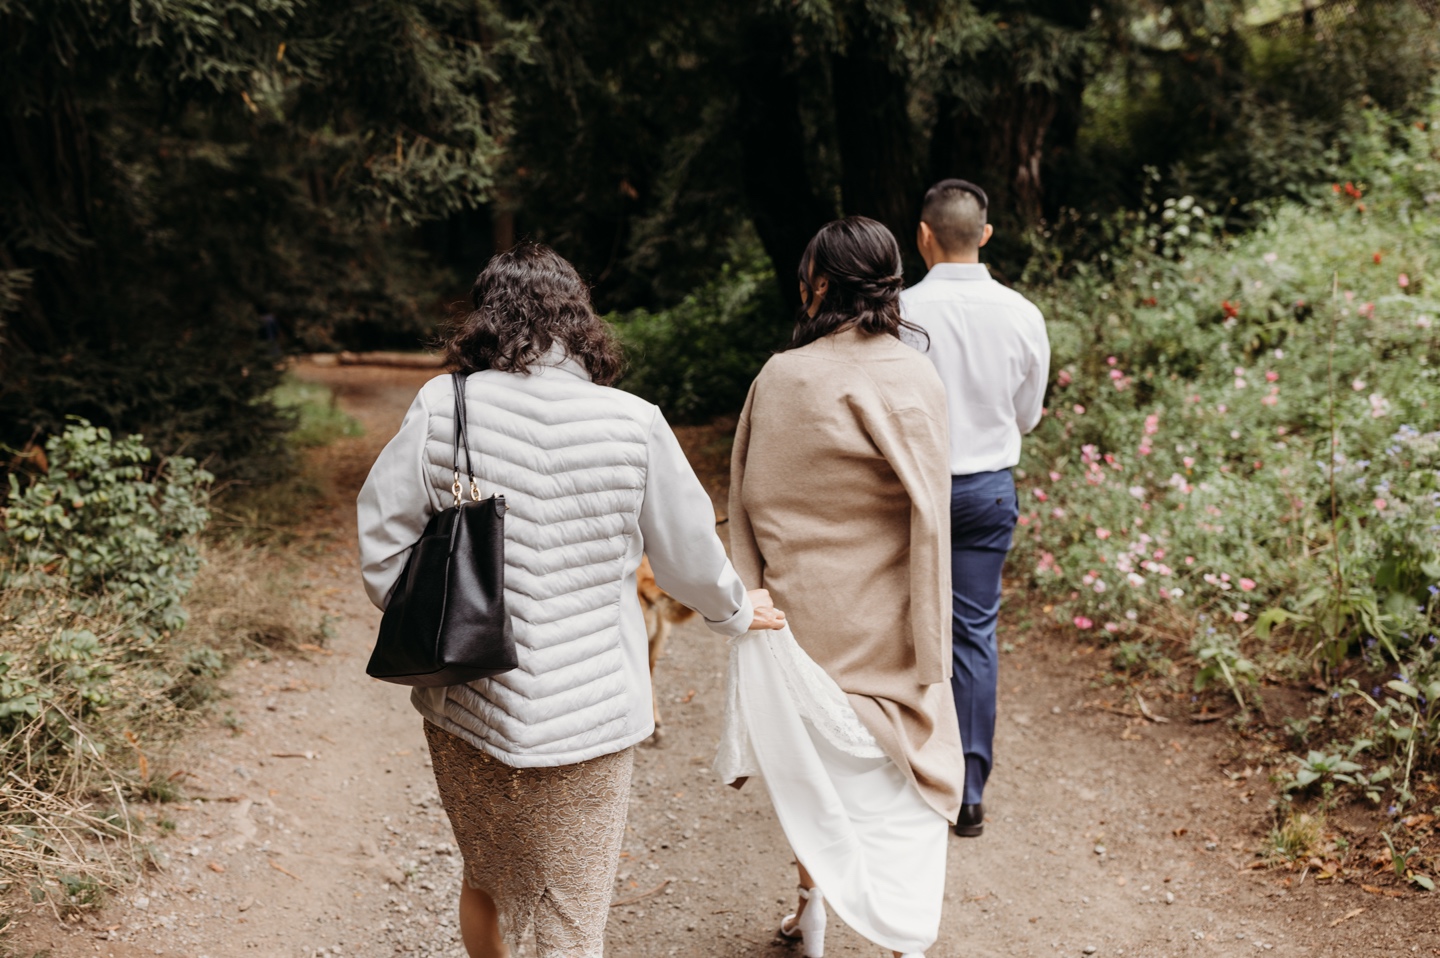 Bride and groom walk through forest path while Mother of the Bride holds the bride's dress train.